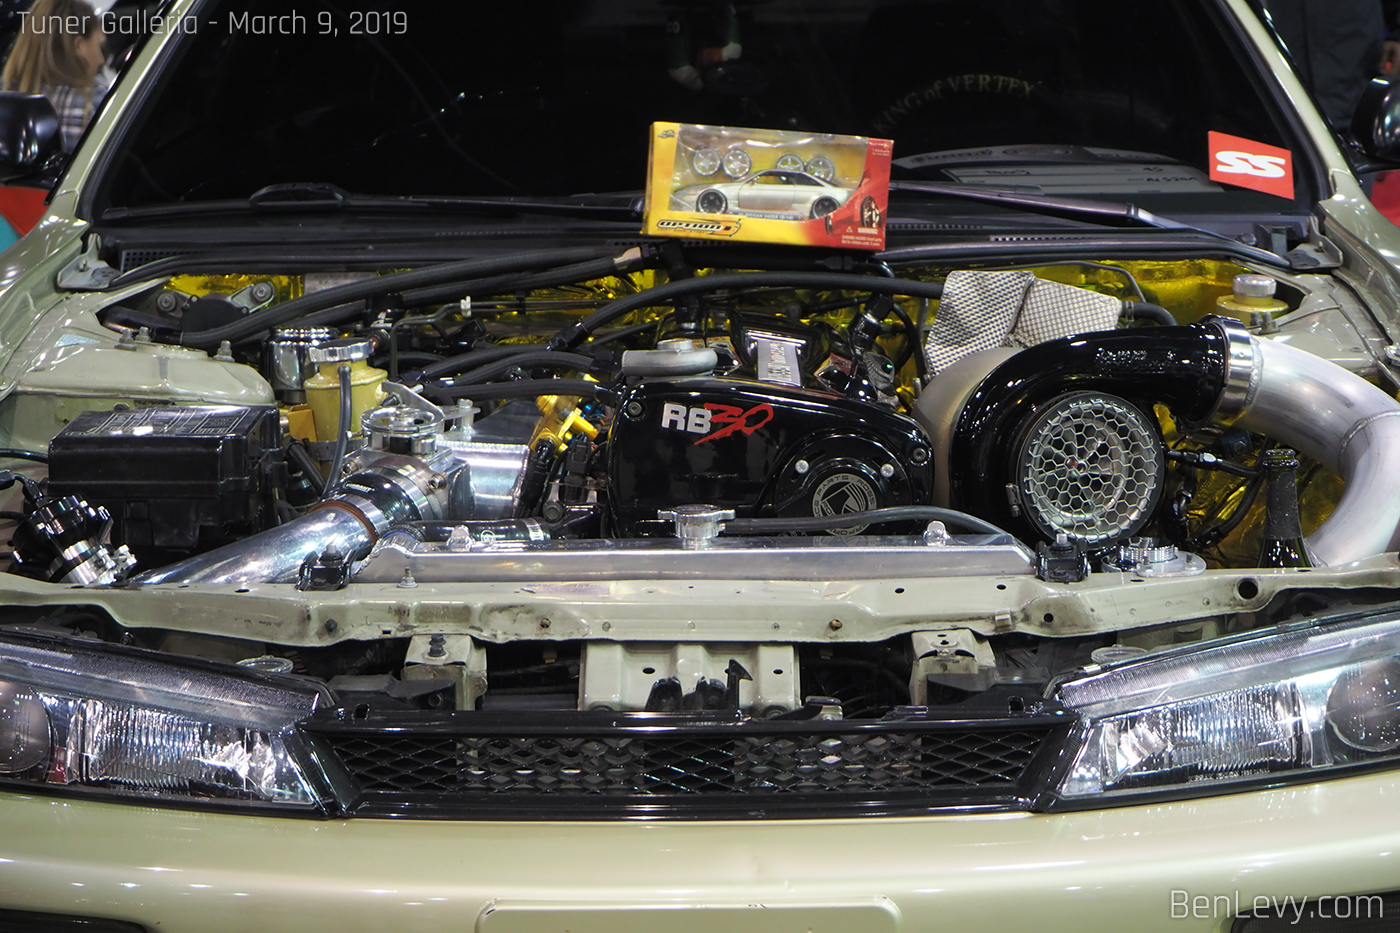 3.0L RB engine in S14 Nissan 240SX